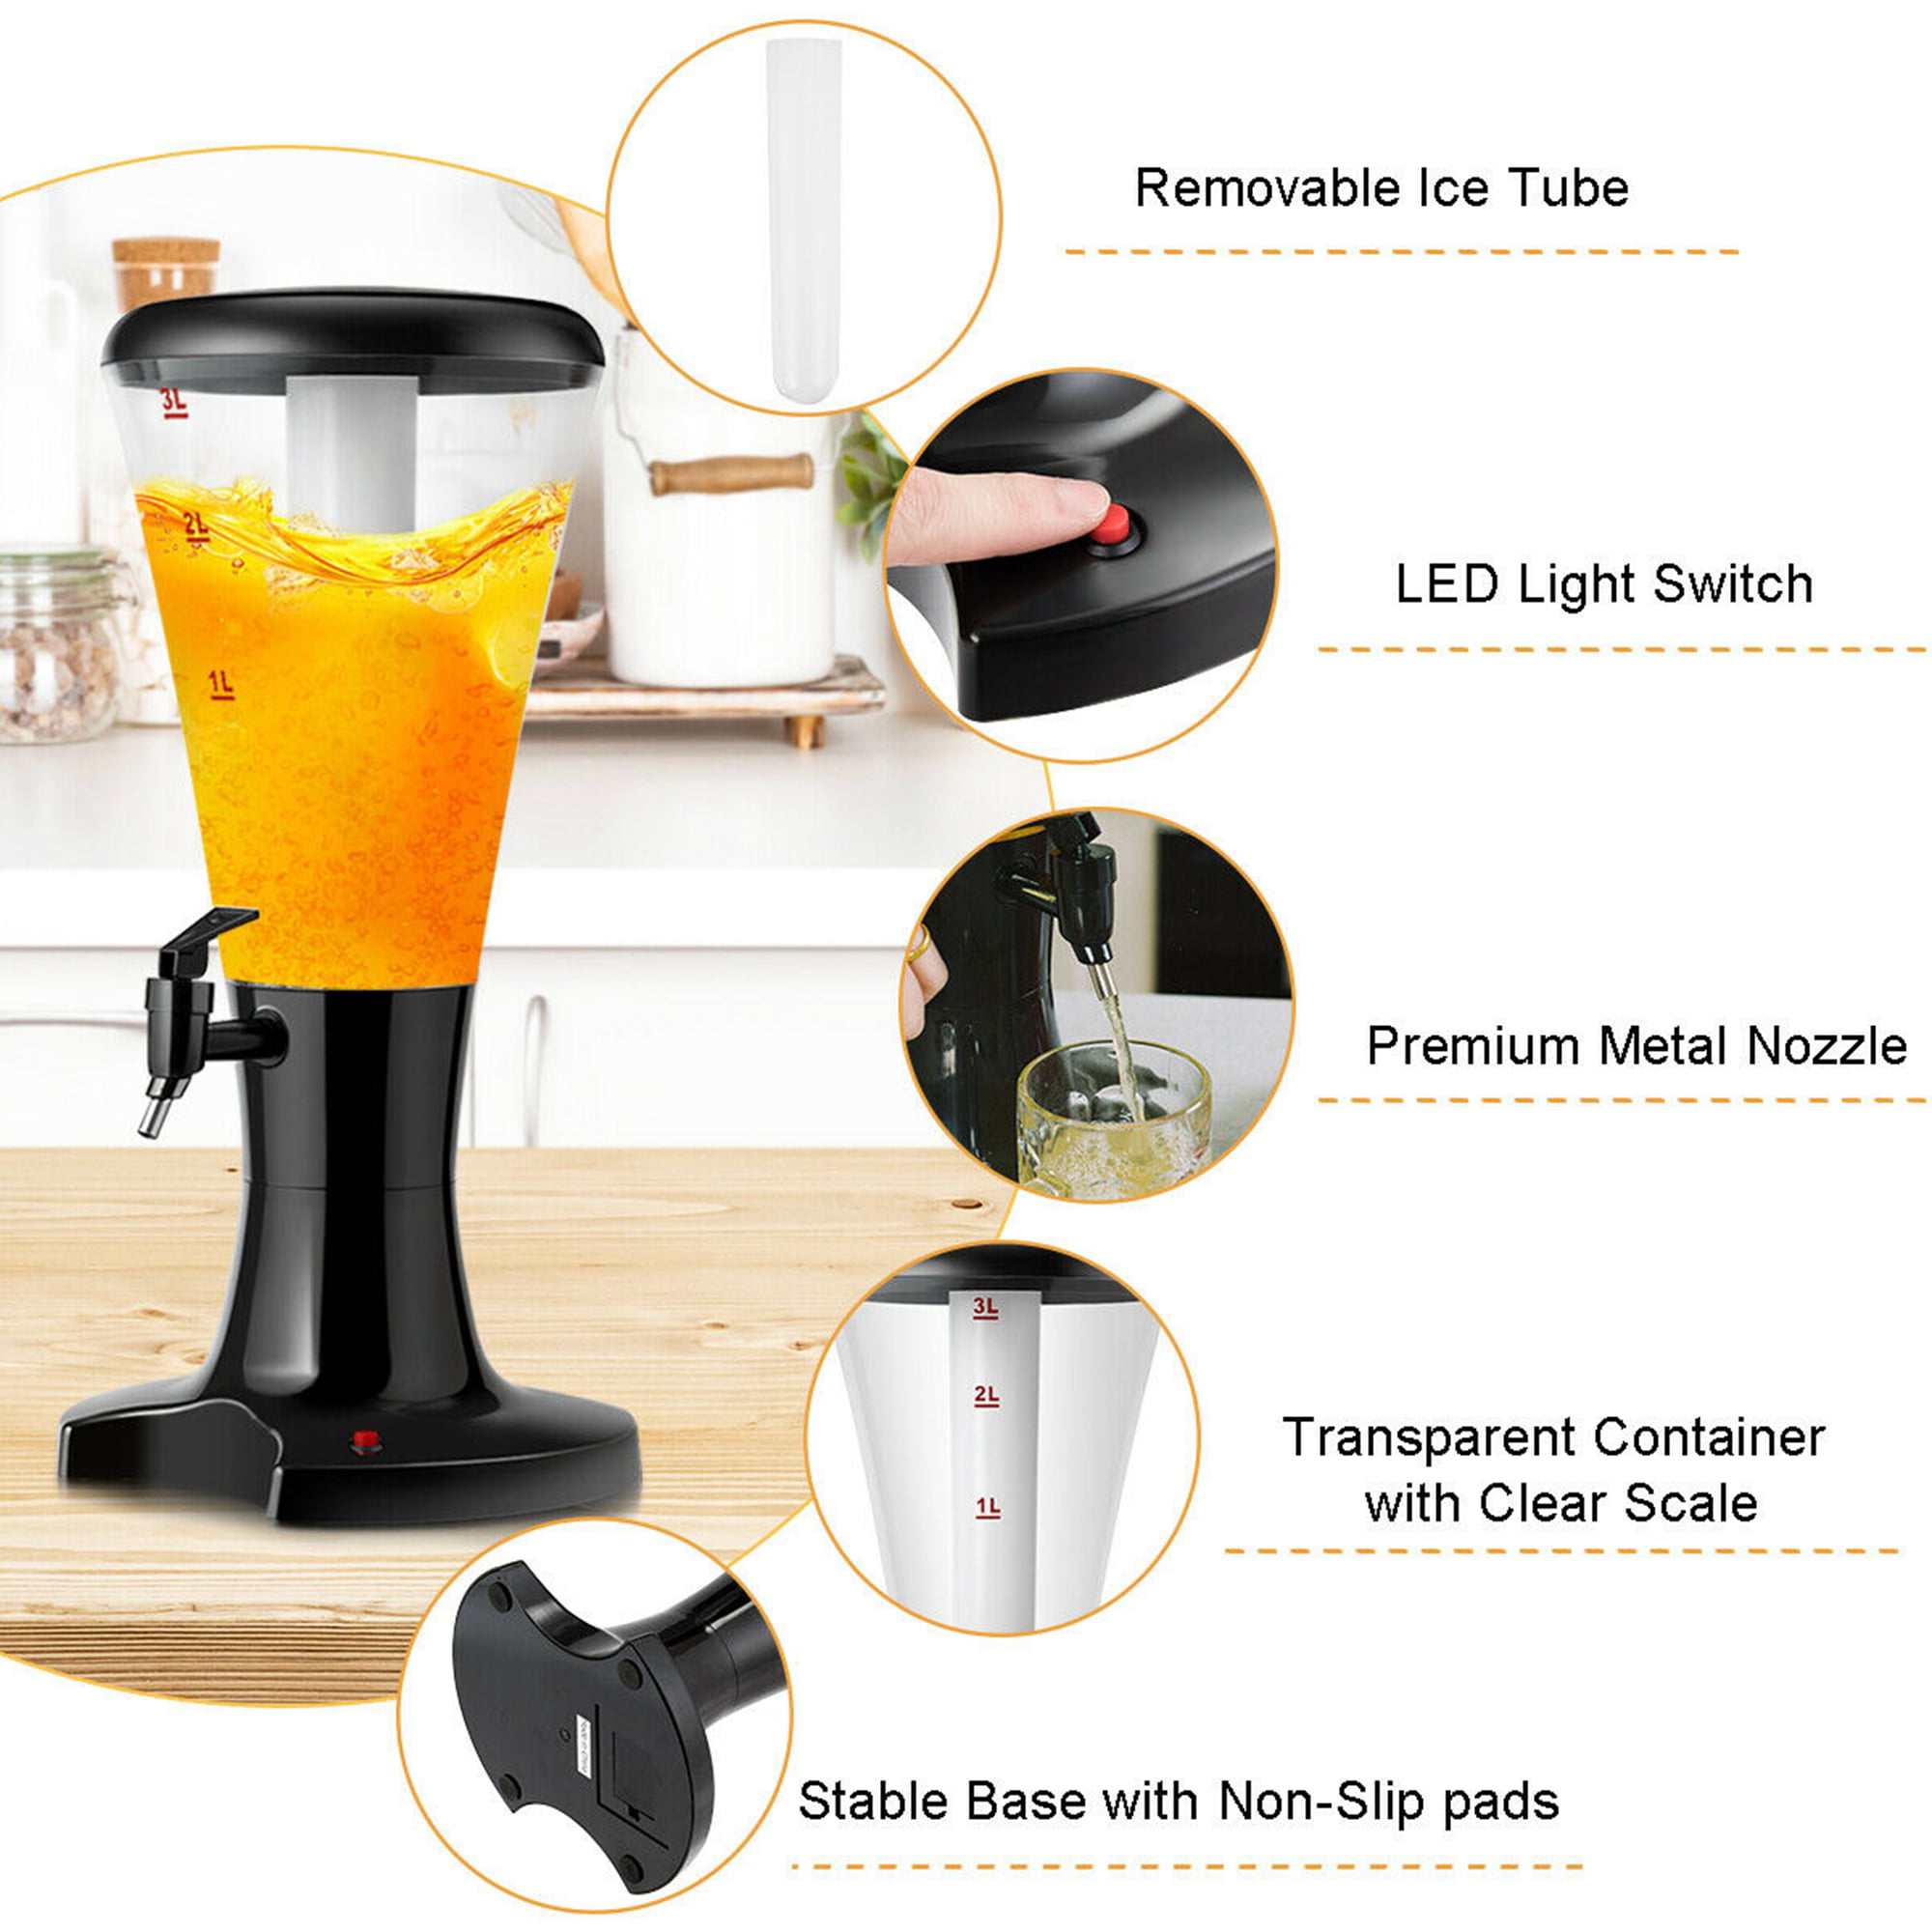 2L Refinery Beer Tower Drink Dispenser w/Pro-Pour Tap & Freeze Tube w/Led  Light - UGSS10131 - IdeaStage Promotional Products